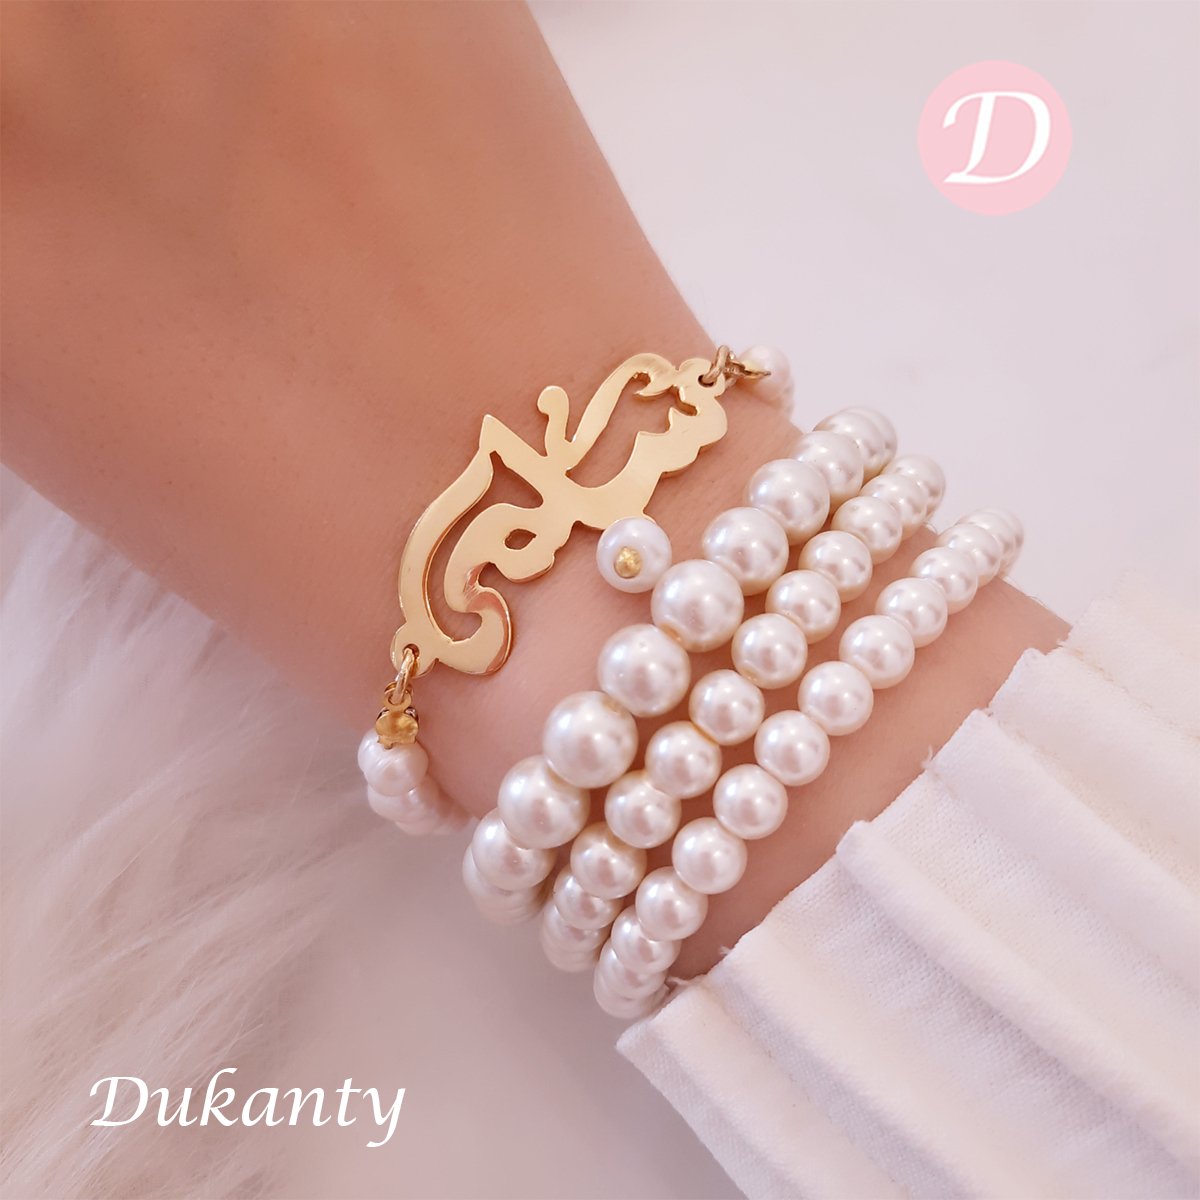 Customized Name with Pearl Set - Gold Plated